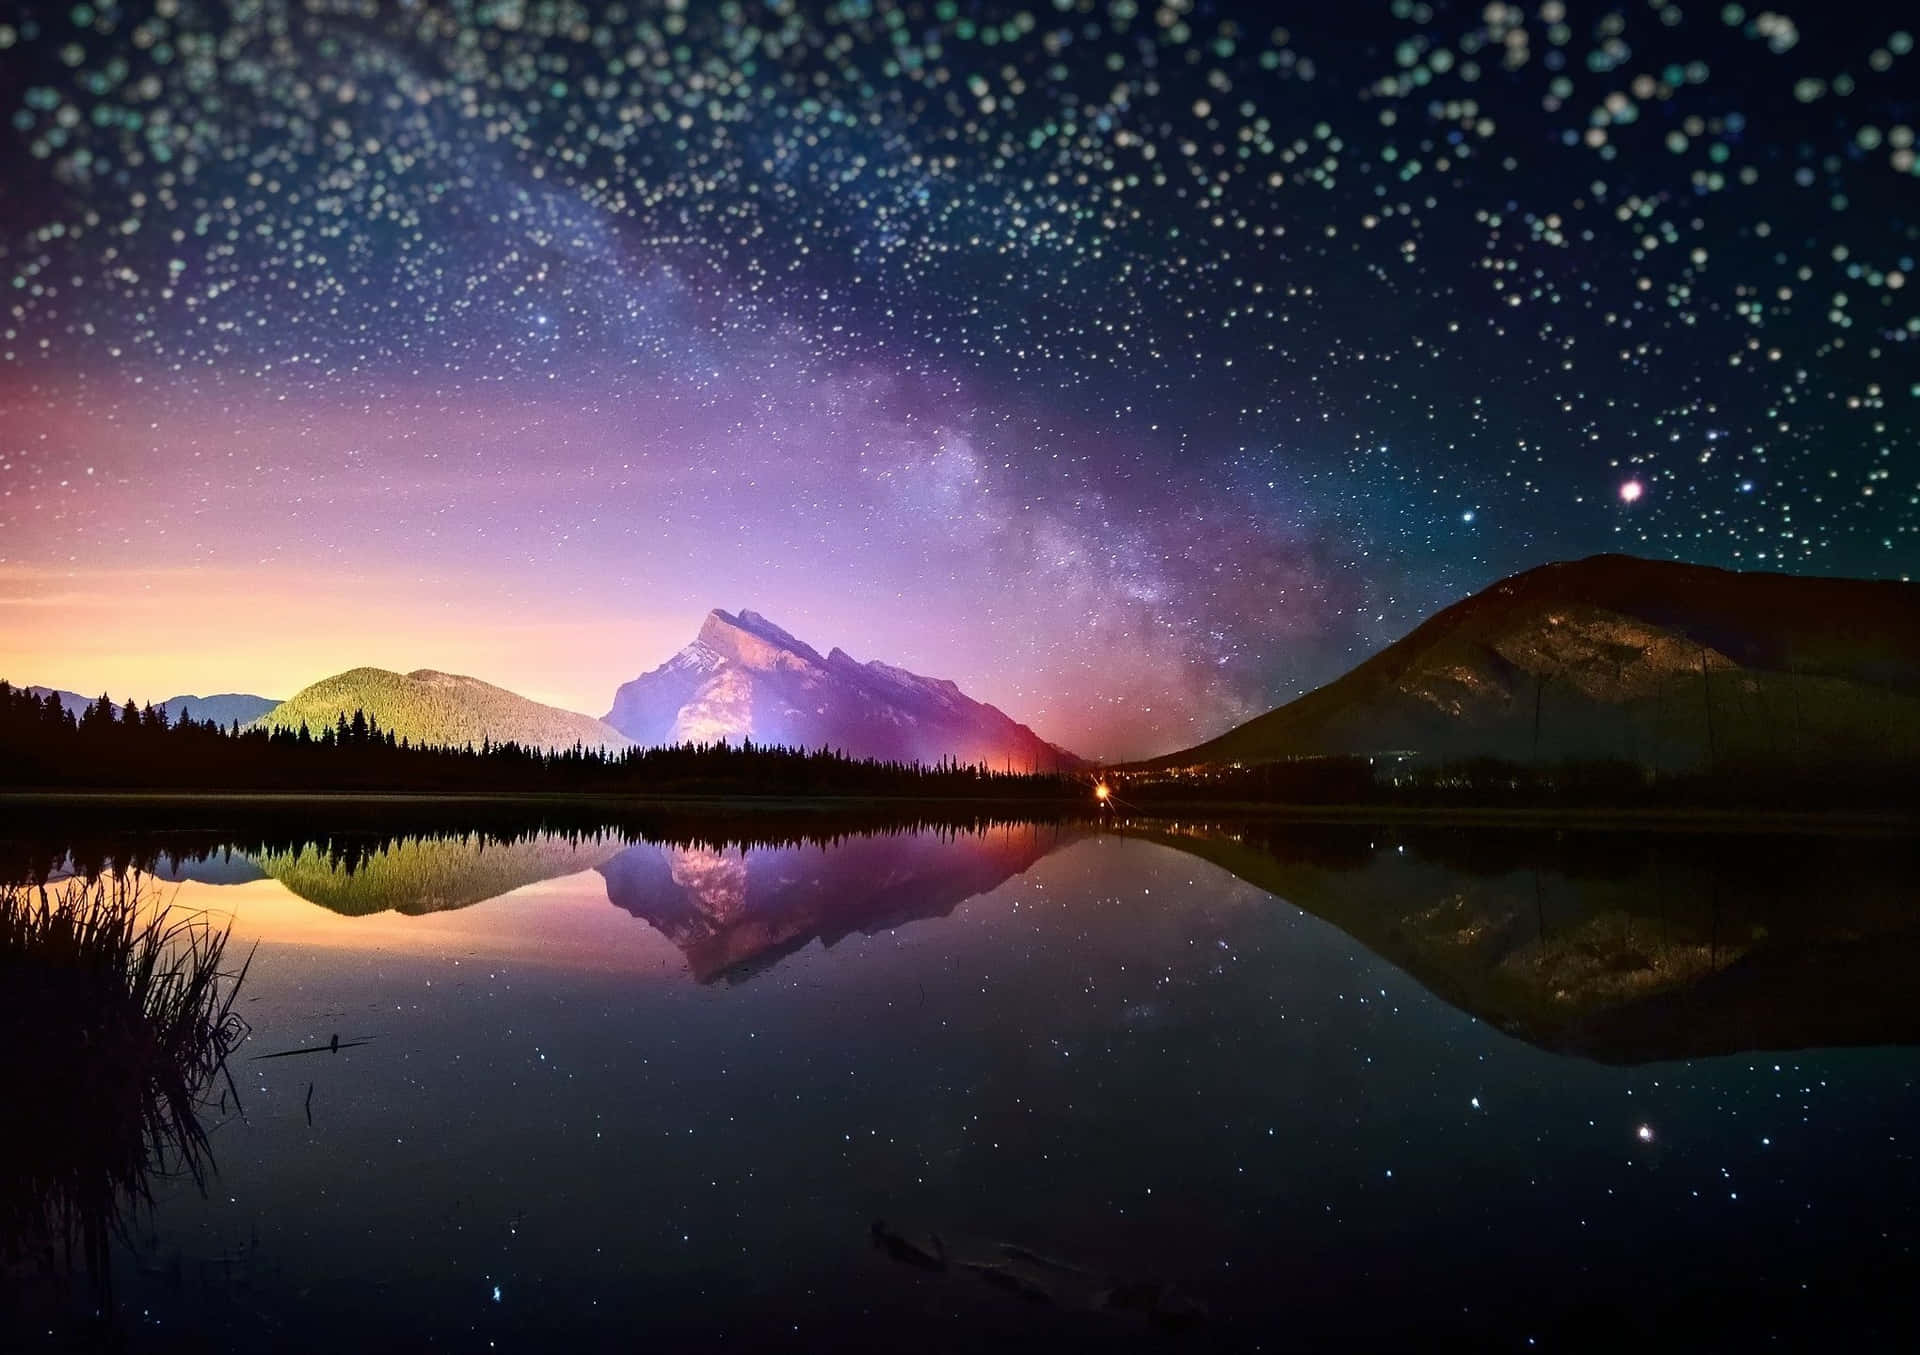 Bring the beauty of the stars to your wall with this majestic night sky. Wallpaper